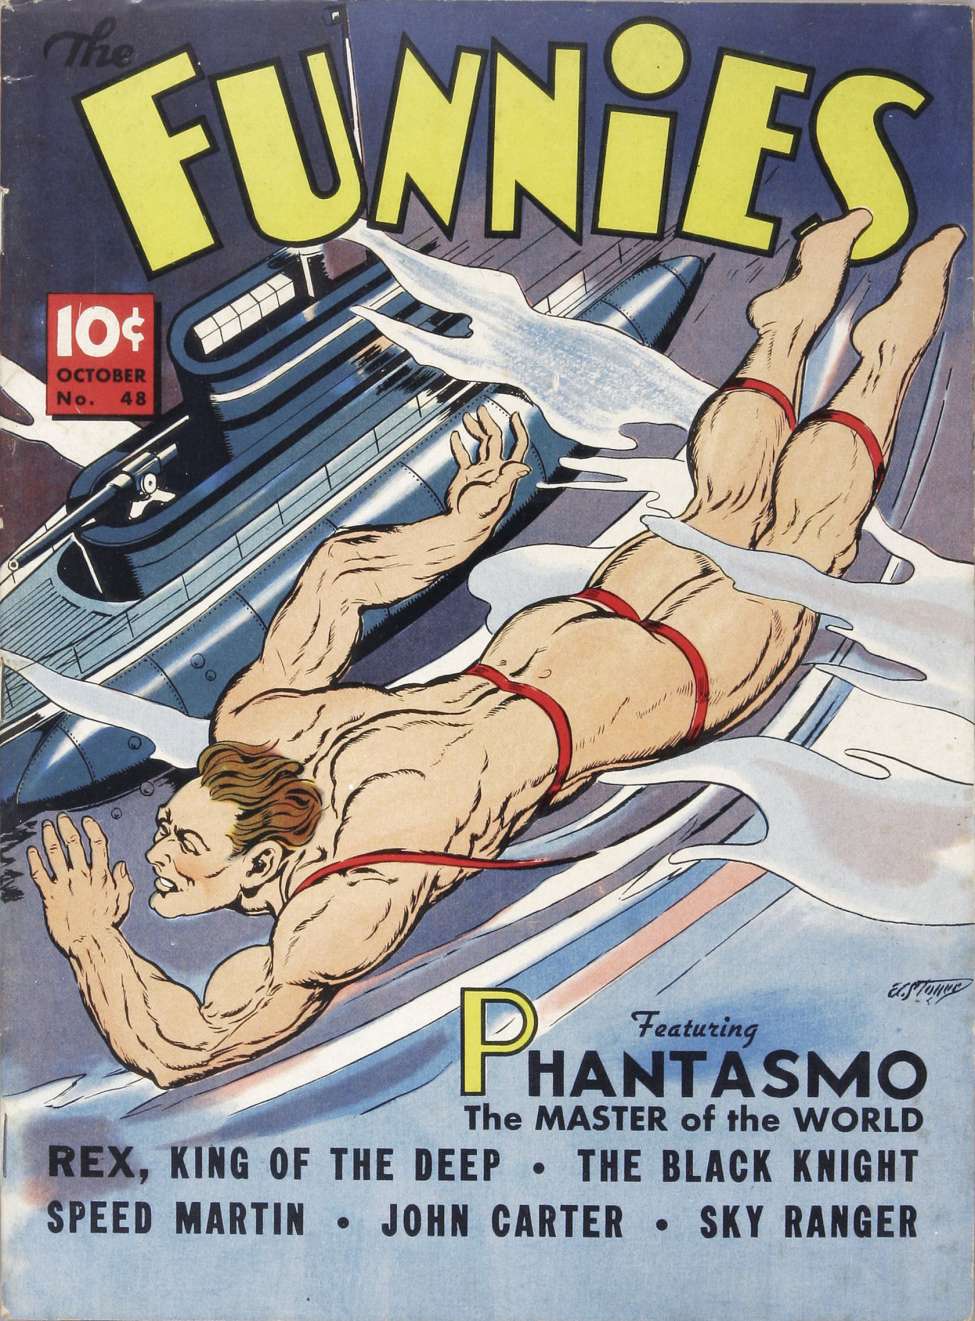 Book Cover For The Funnies 48